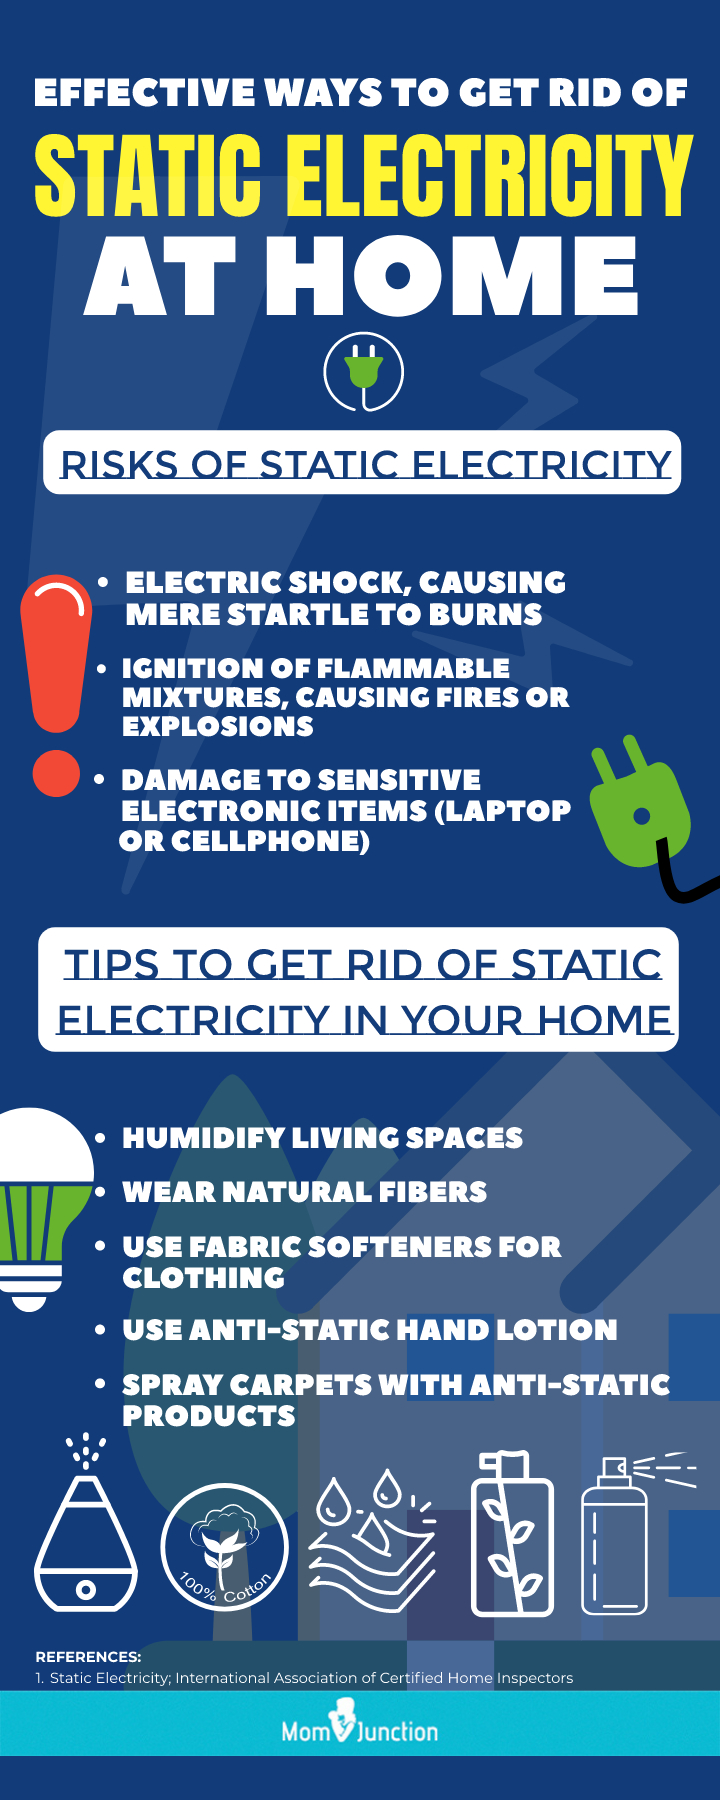 effective ways to get rid of static electricity at home [infographic]